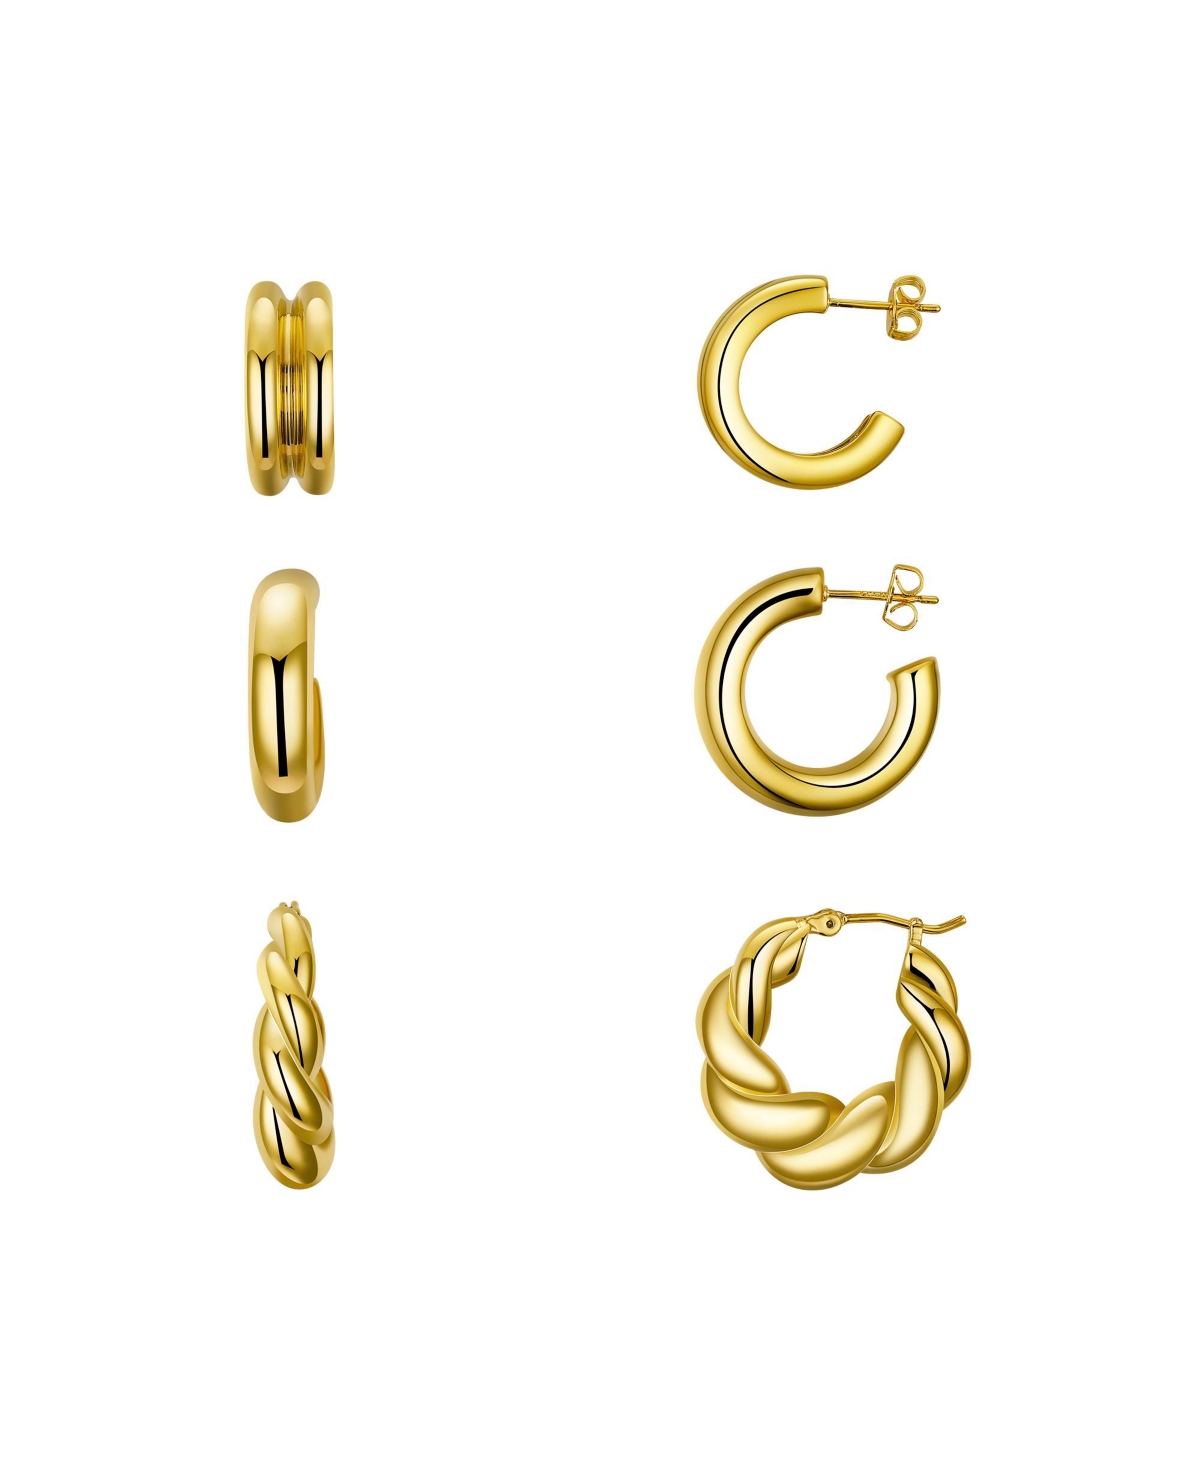 Gold-Tone Stainless Steel Hoop Earring Set - Gold